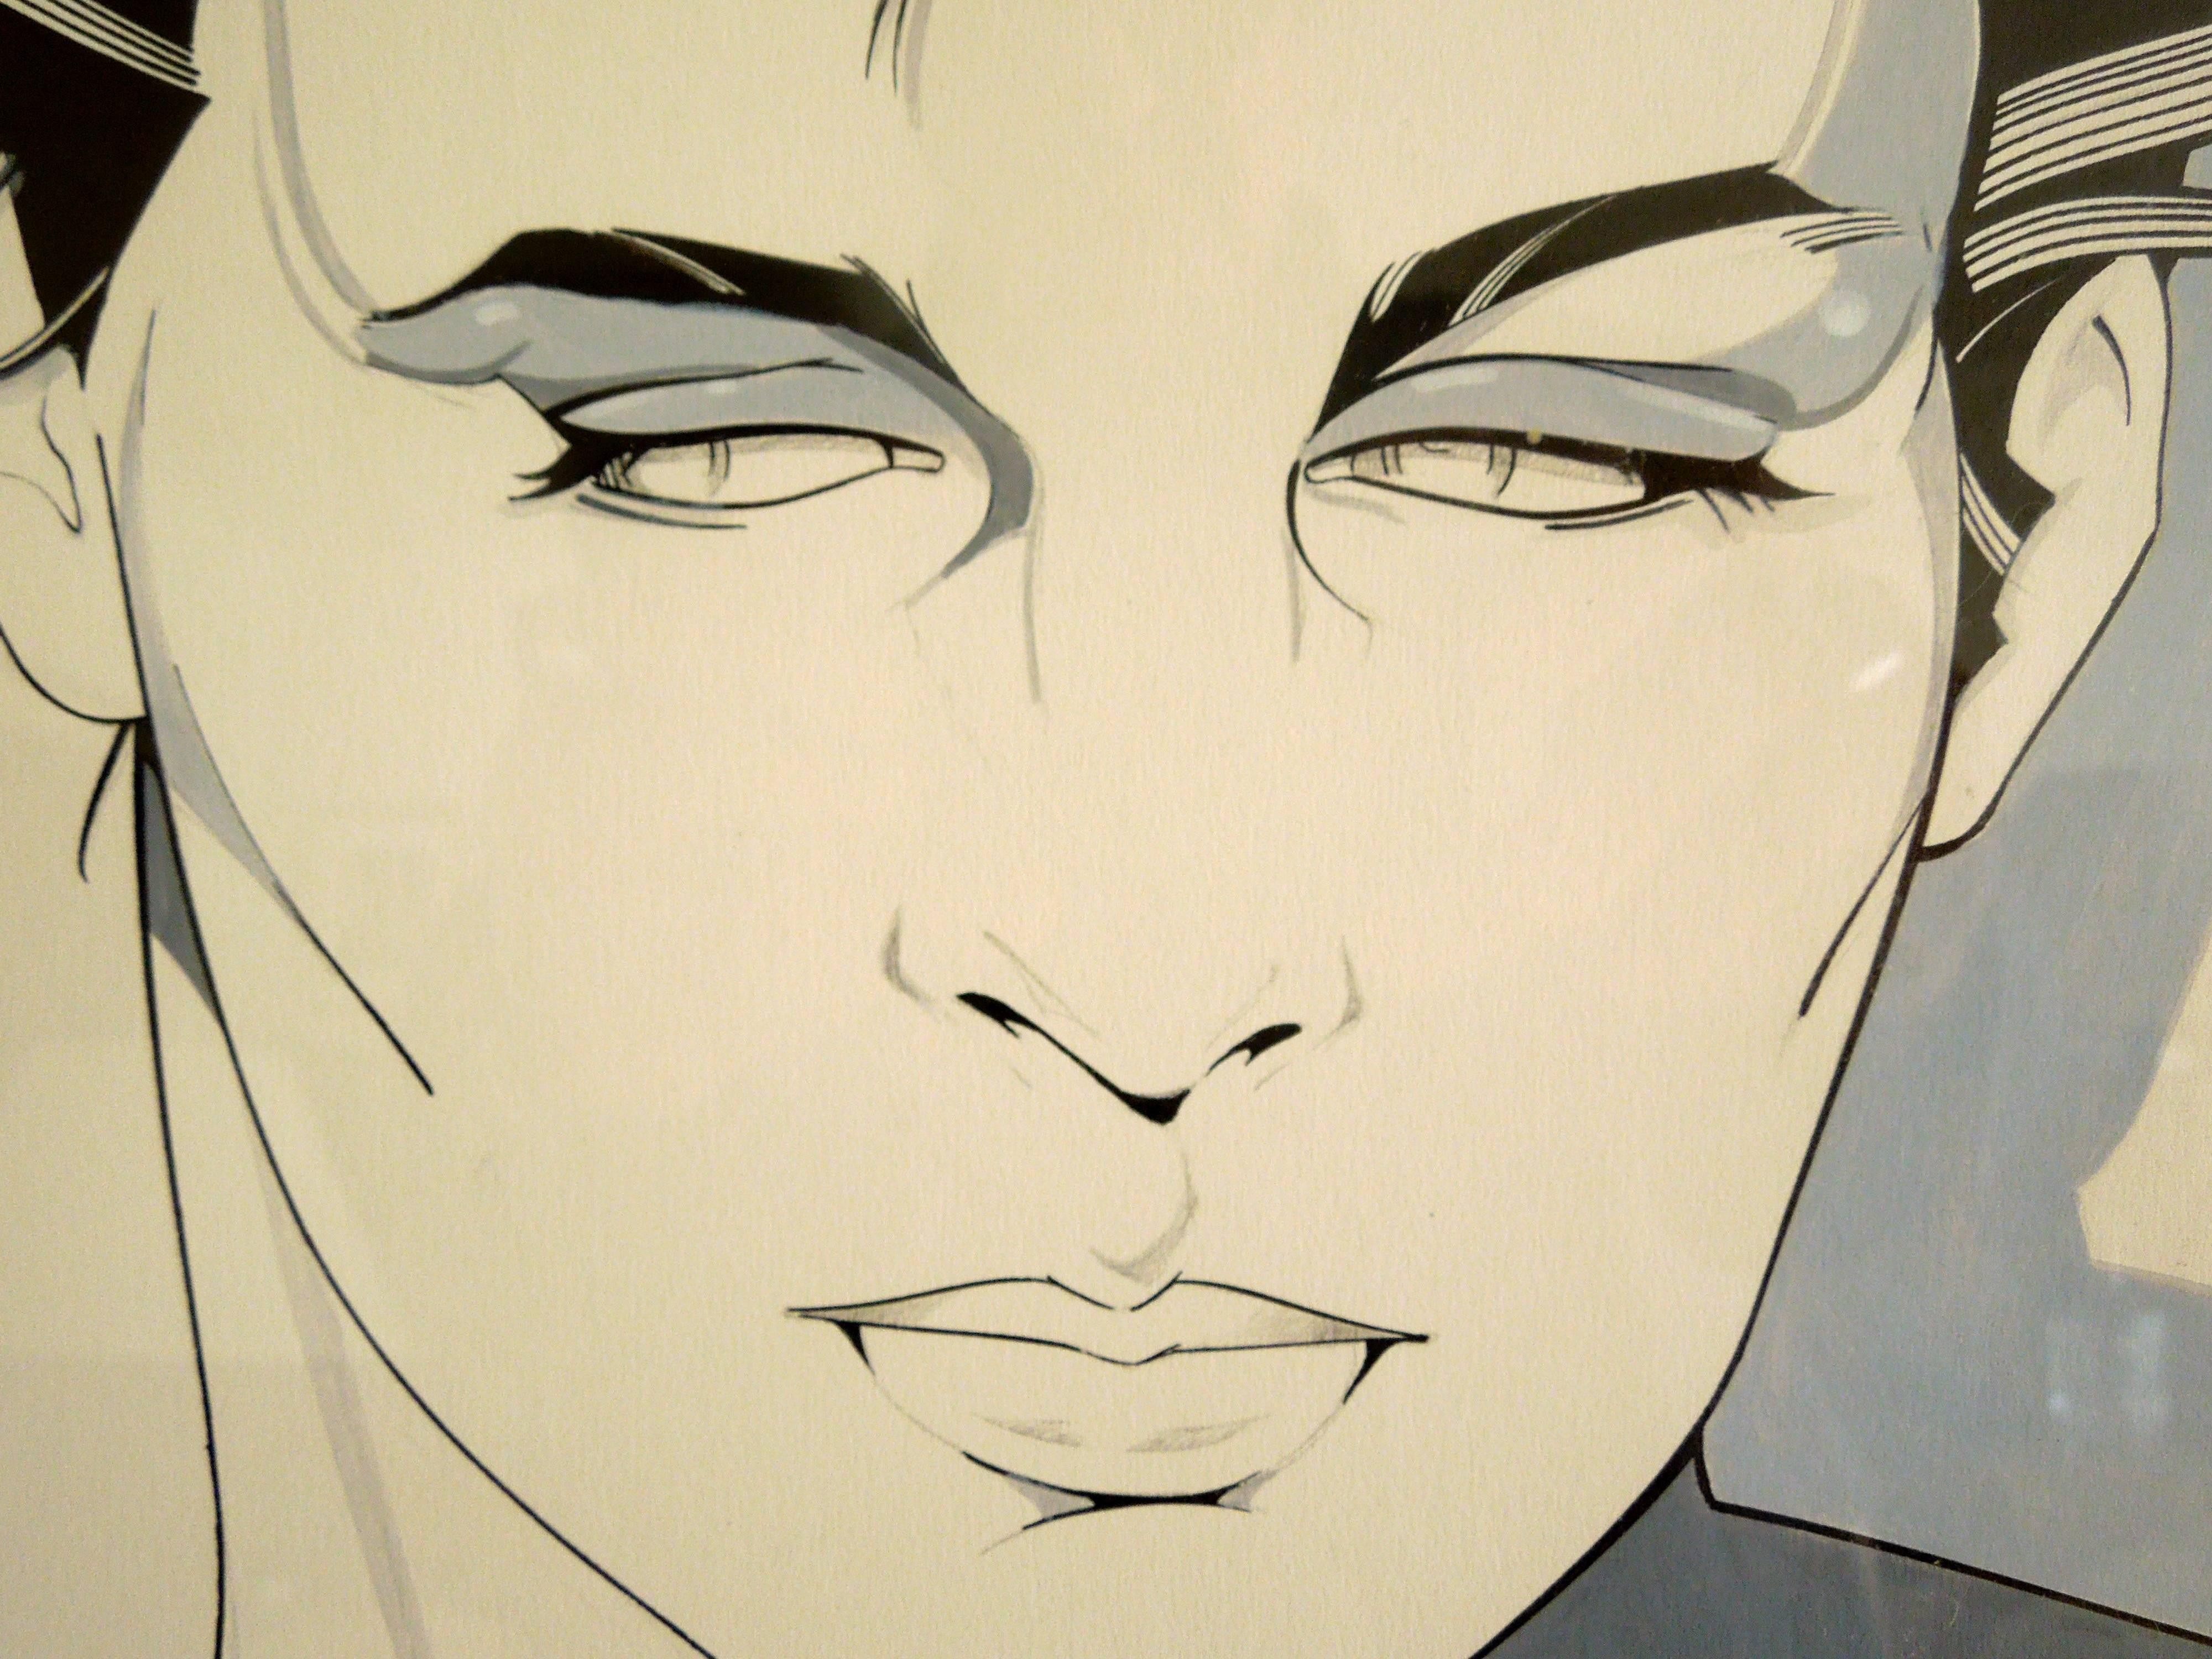 Purchased directly from the estate of Patrick Nagel, a unique acrylic on board (not a silkscreen, this image is hand-painted by Patrick Nagel) of male portrait done in the early 1980s. The image appears full page in the coffee table book of Mr.